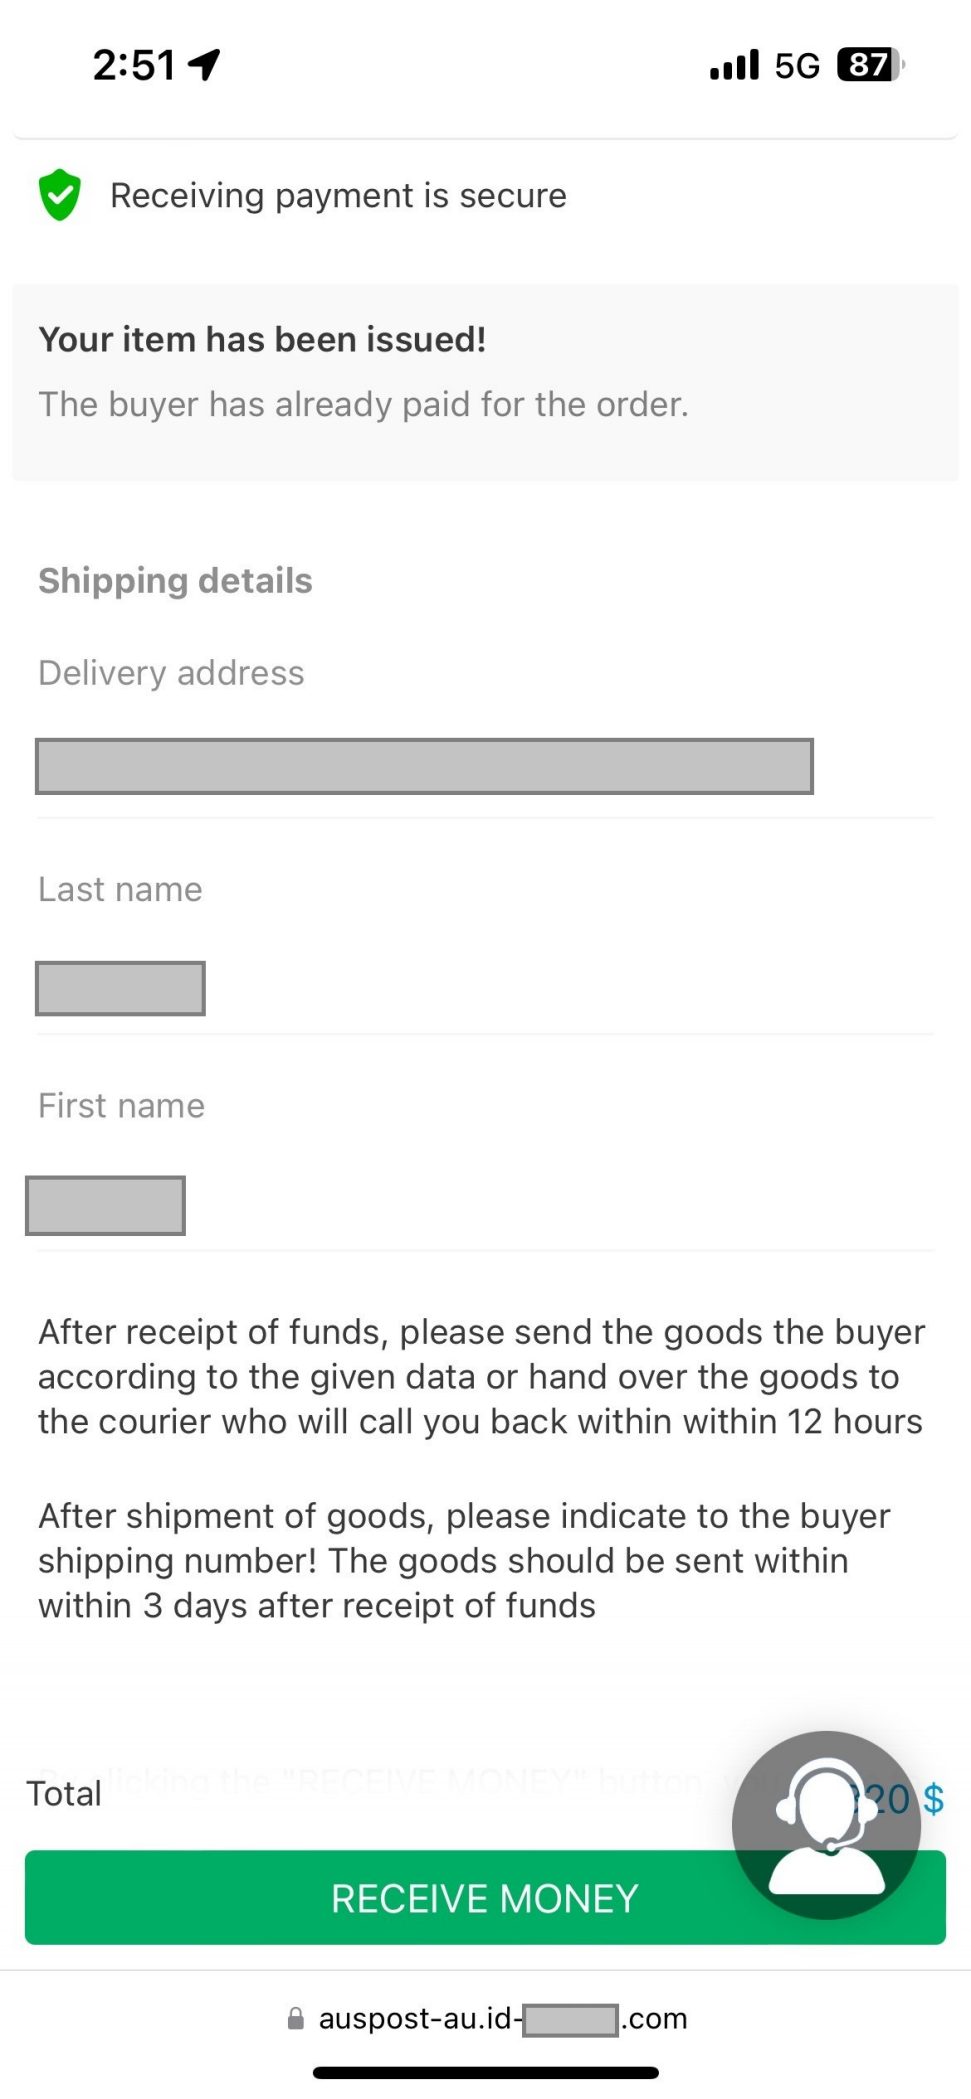 Screenshot of a mobile payment confirmation interface showing a green check mark with text indicating secure payment receipt, details of an item issued, and instructions for shipping within 12 hours. Fields for entering delivery address and names are visible, along with a ‘RECEIVE MONEY’ button and a suspicious URL at the bottom.